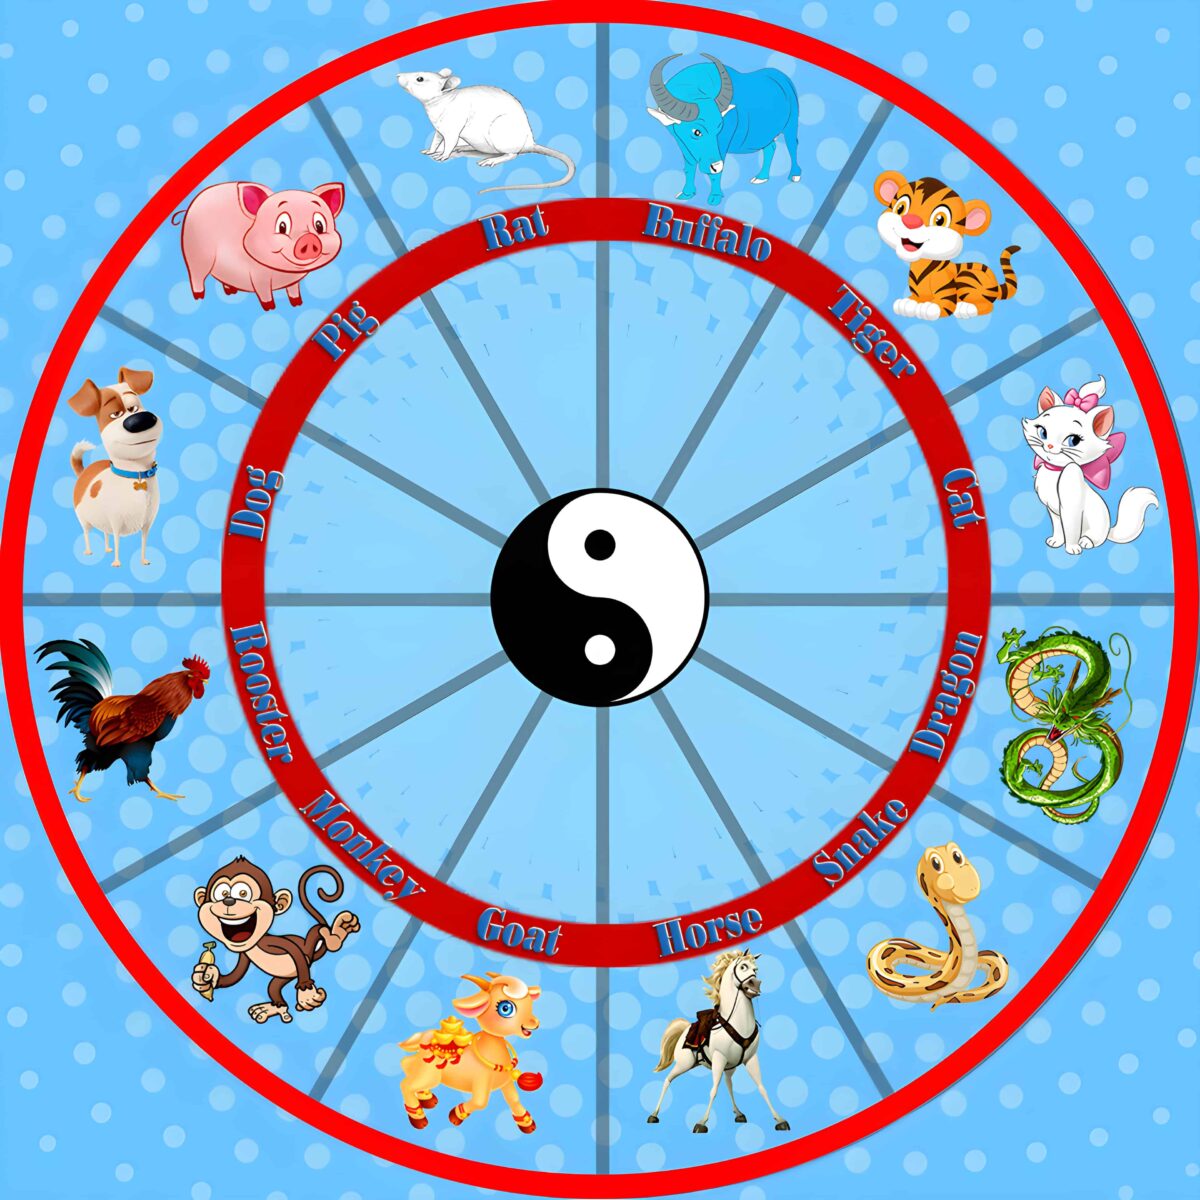 Secrets Of Vietnamese Zodiac Guide To The 12 Animal Signs